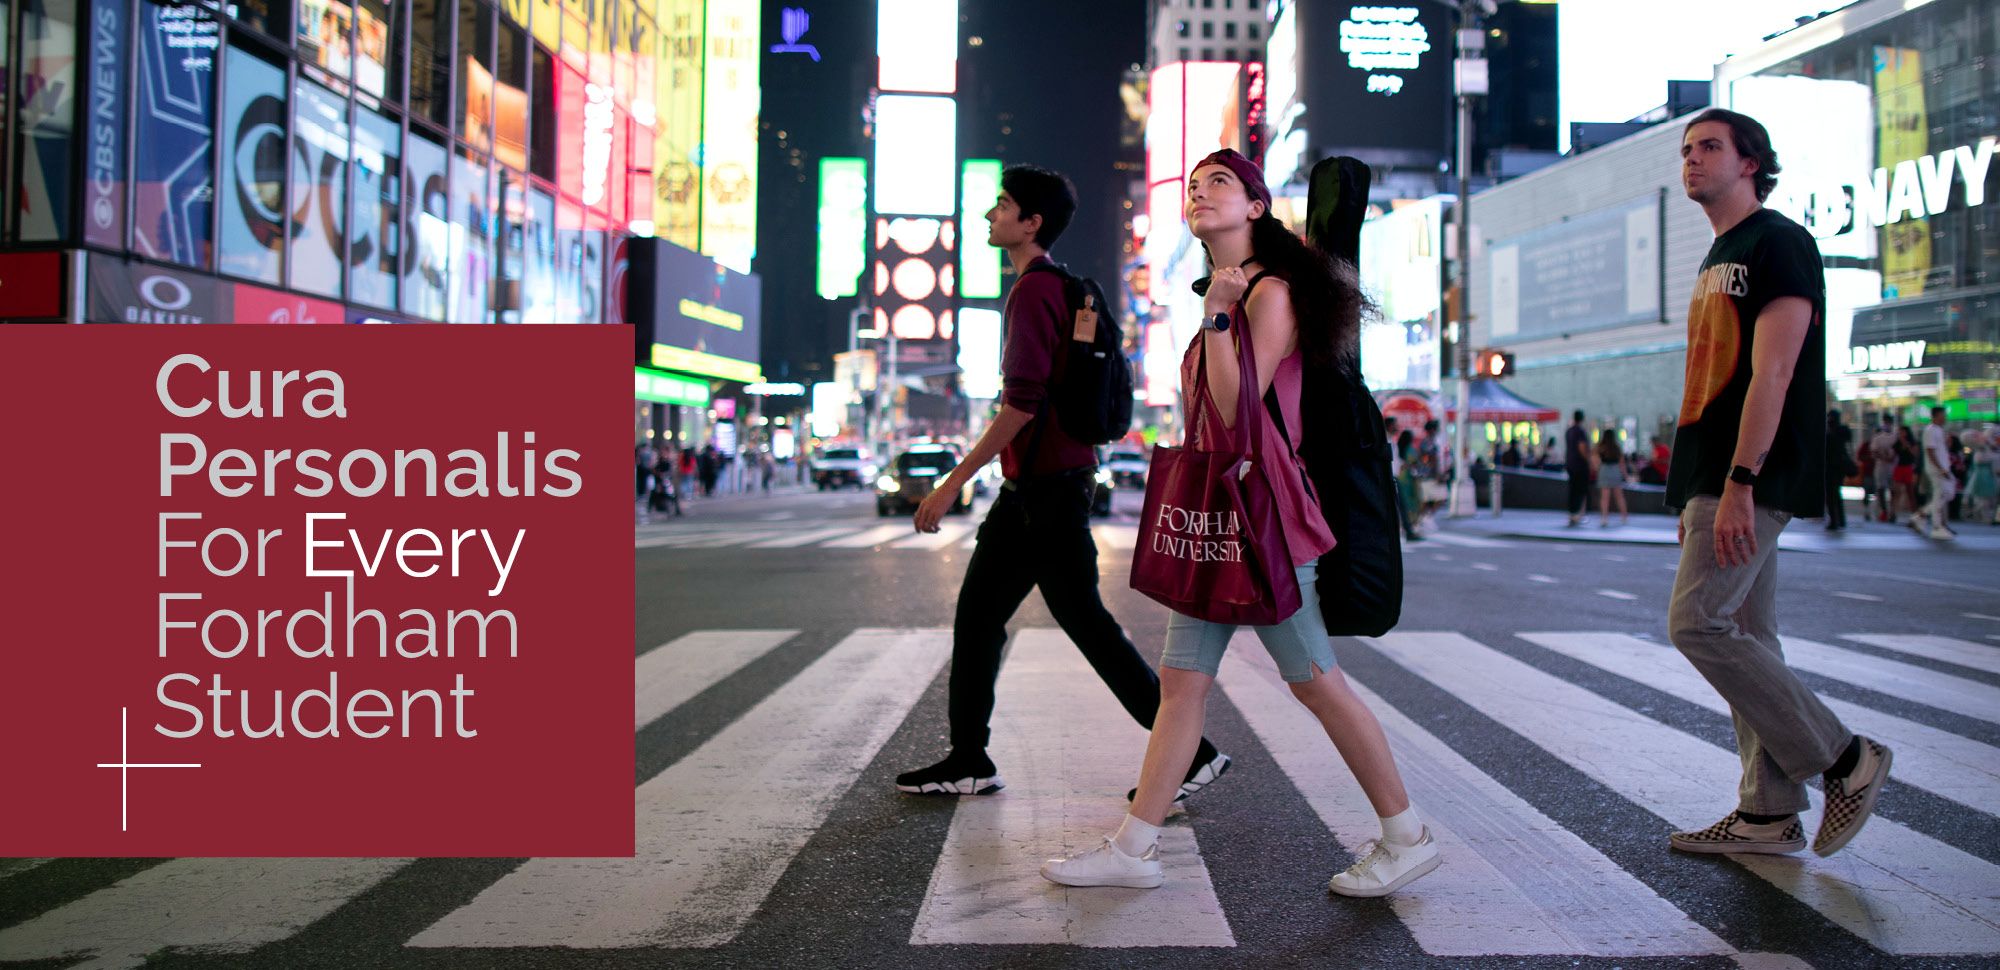 Cura Personalis | For Every Fordham Student campaign logo with image of Fordham students in Times Square